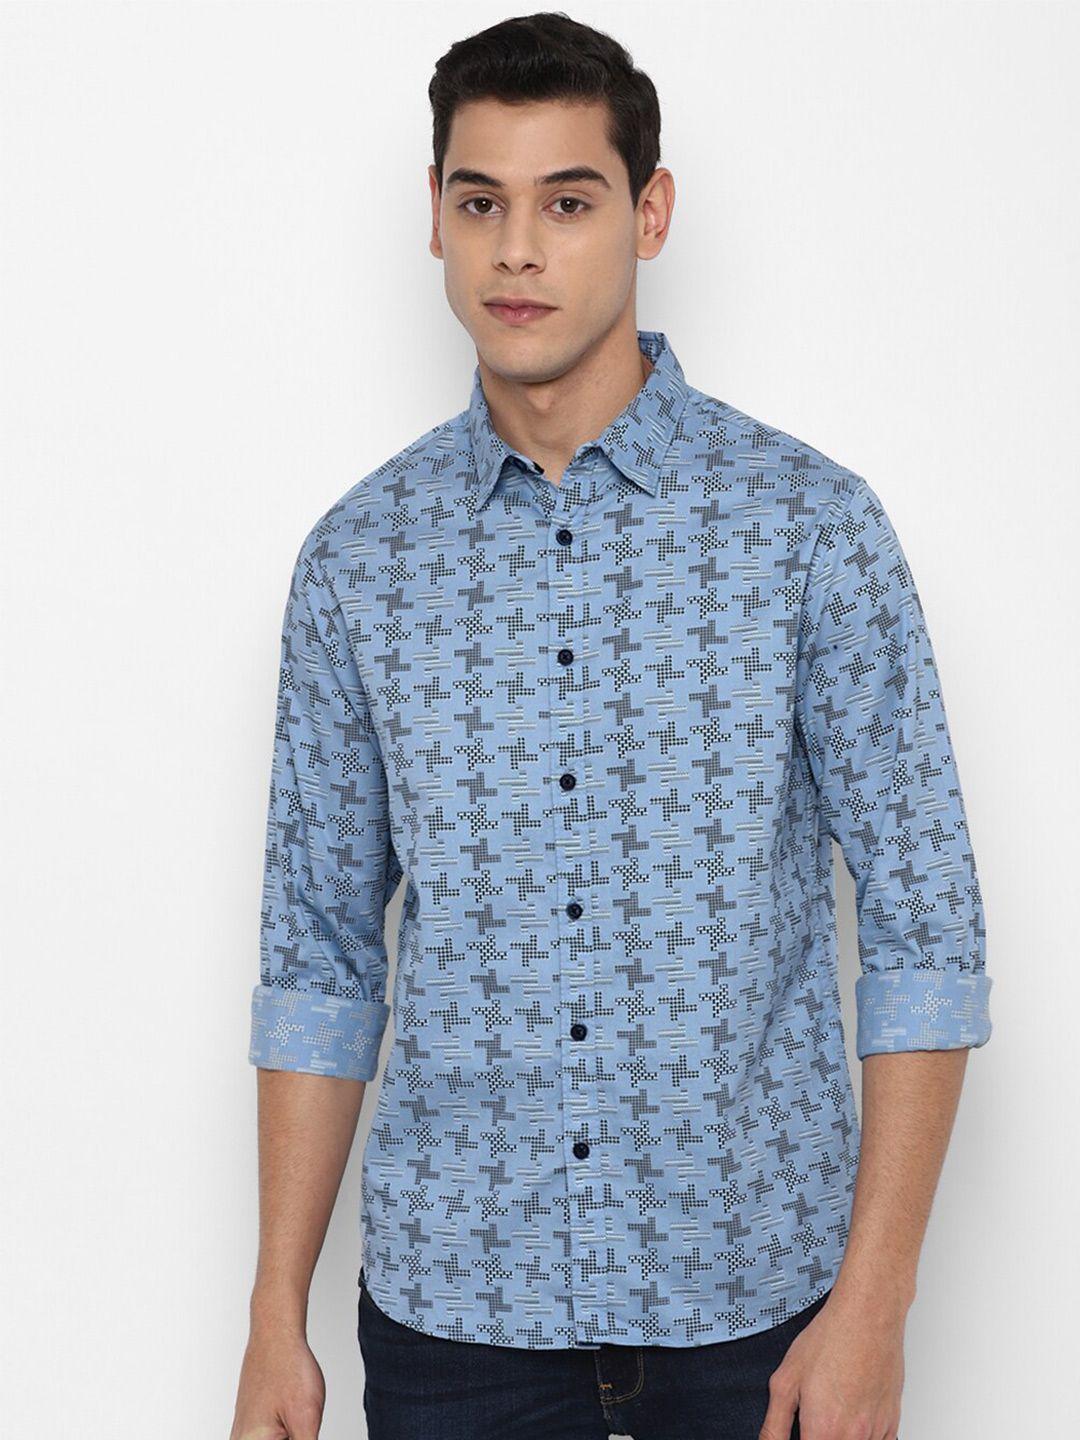 forever-21-men-blue-geometric-pure-cotton-printed-casual-shirt